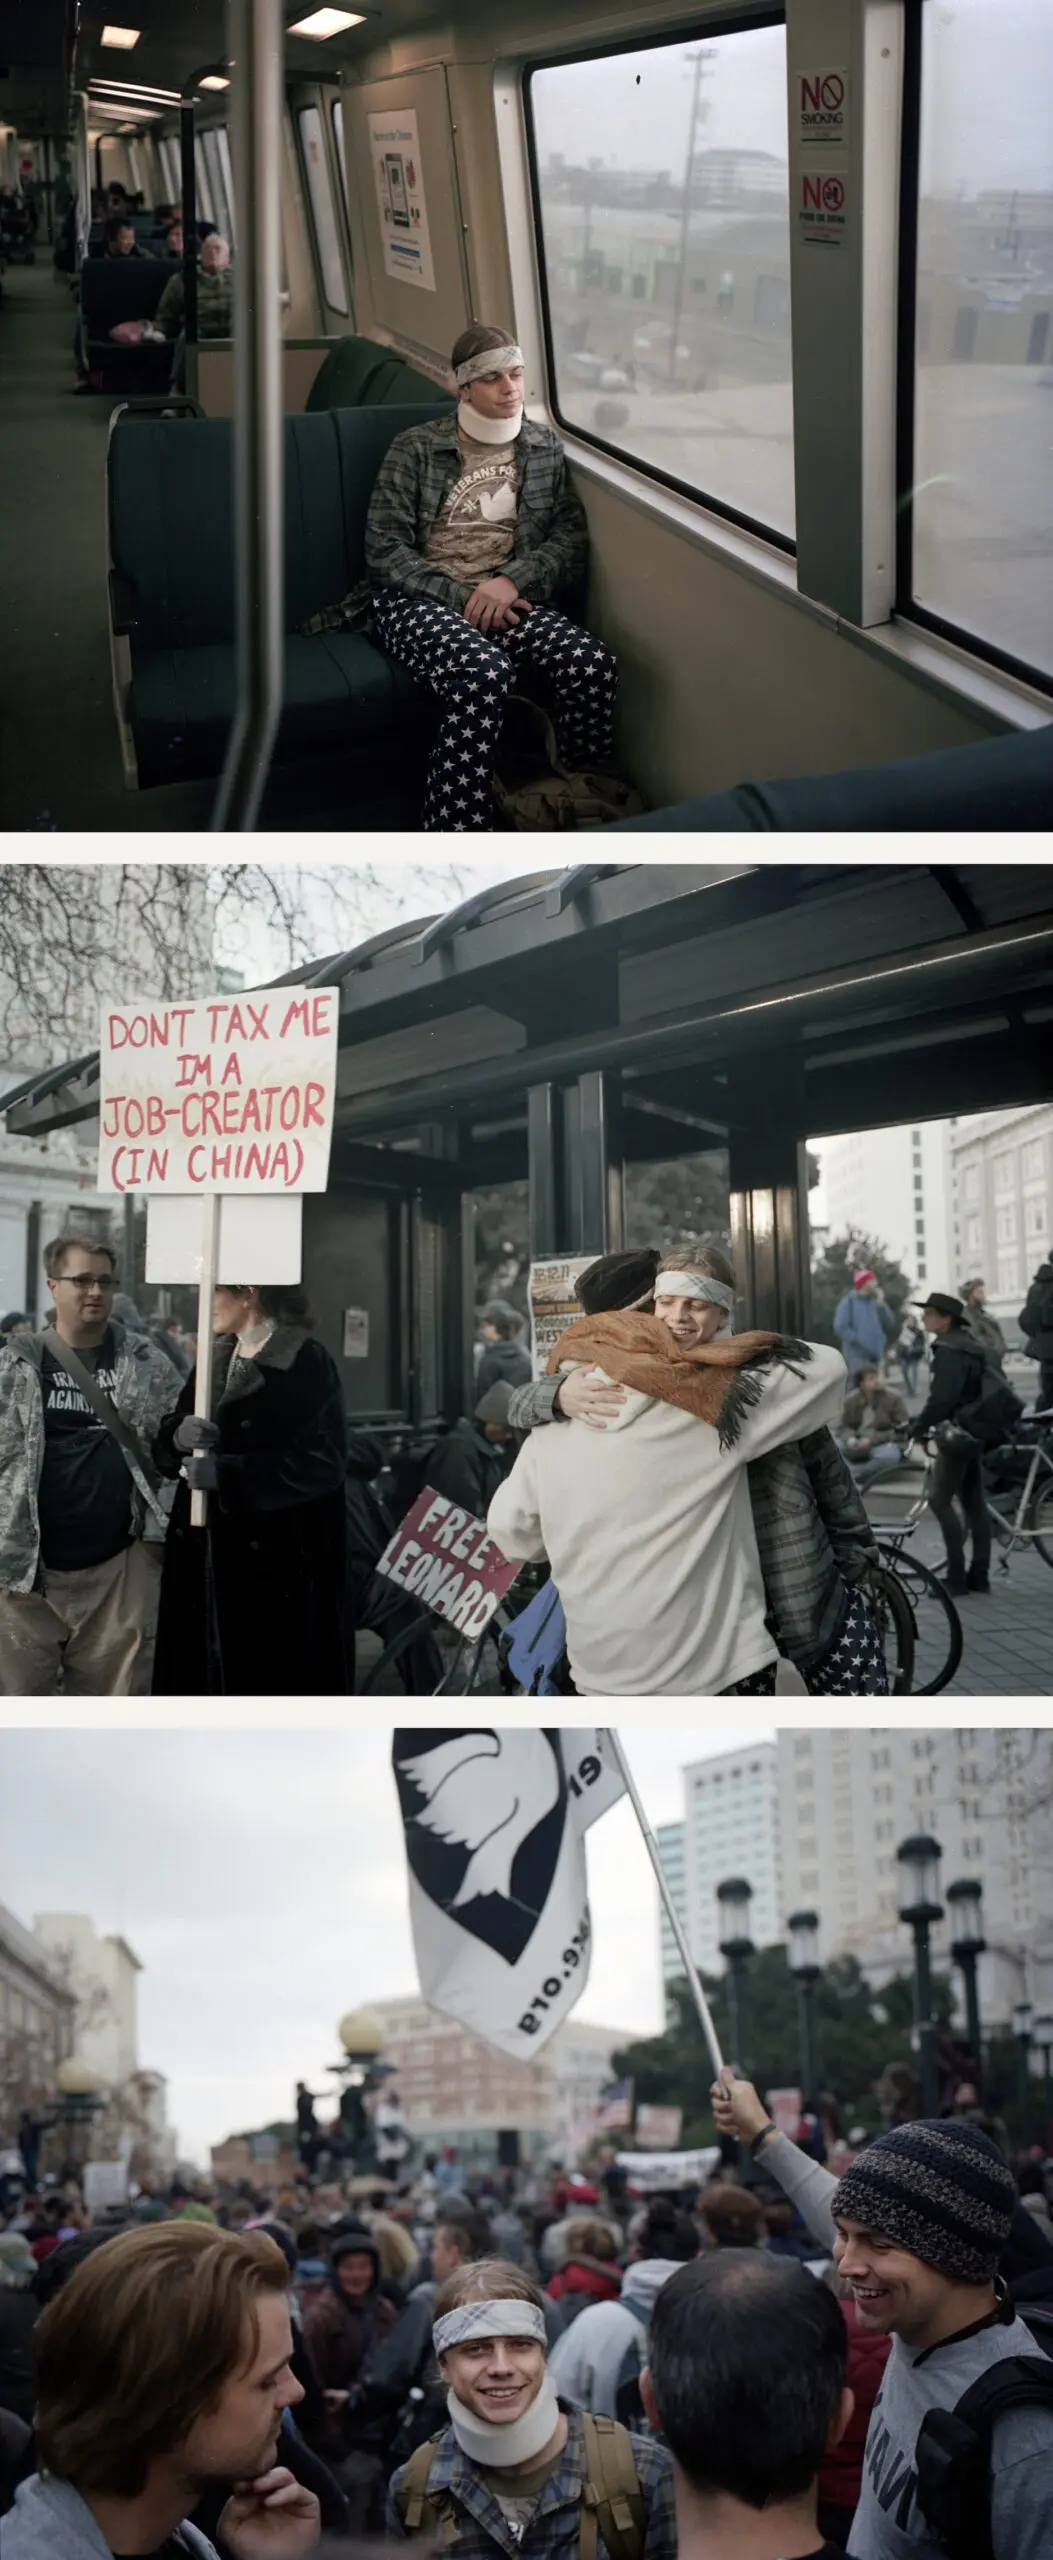 Three pictures, from top: A man rides a train, two people hug while a protester watches, a man smiles amid a crowd of people.